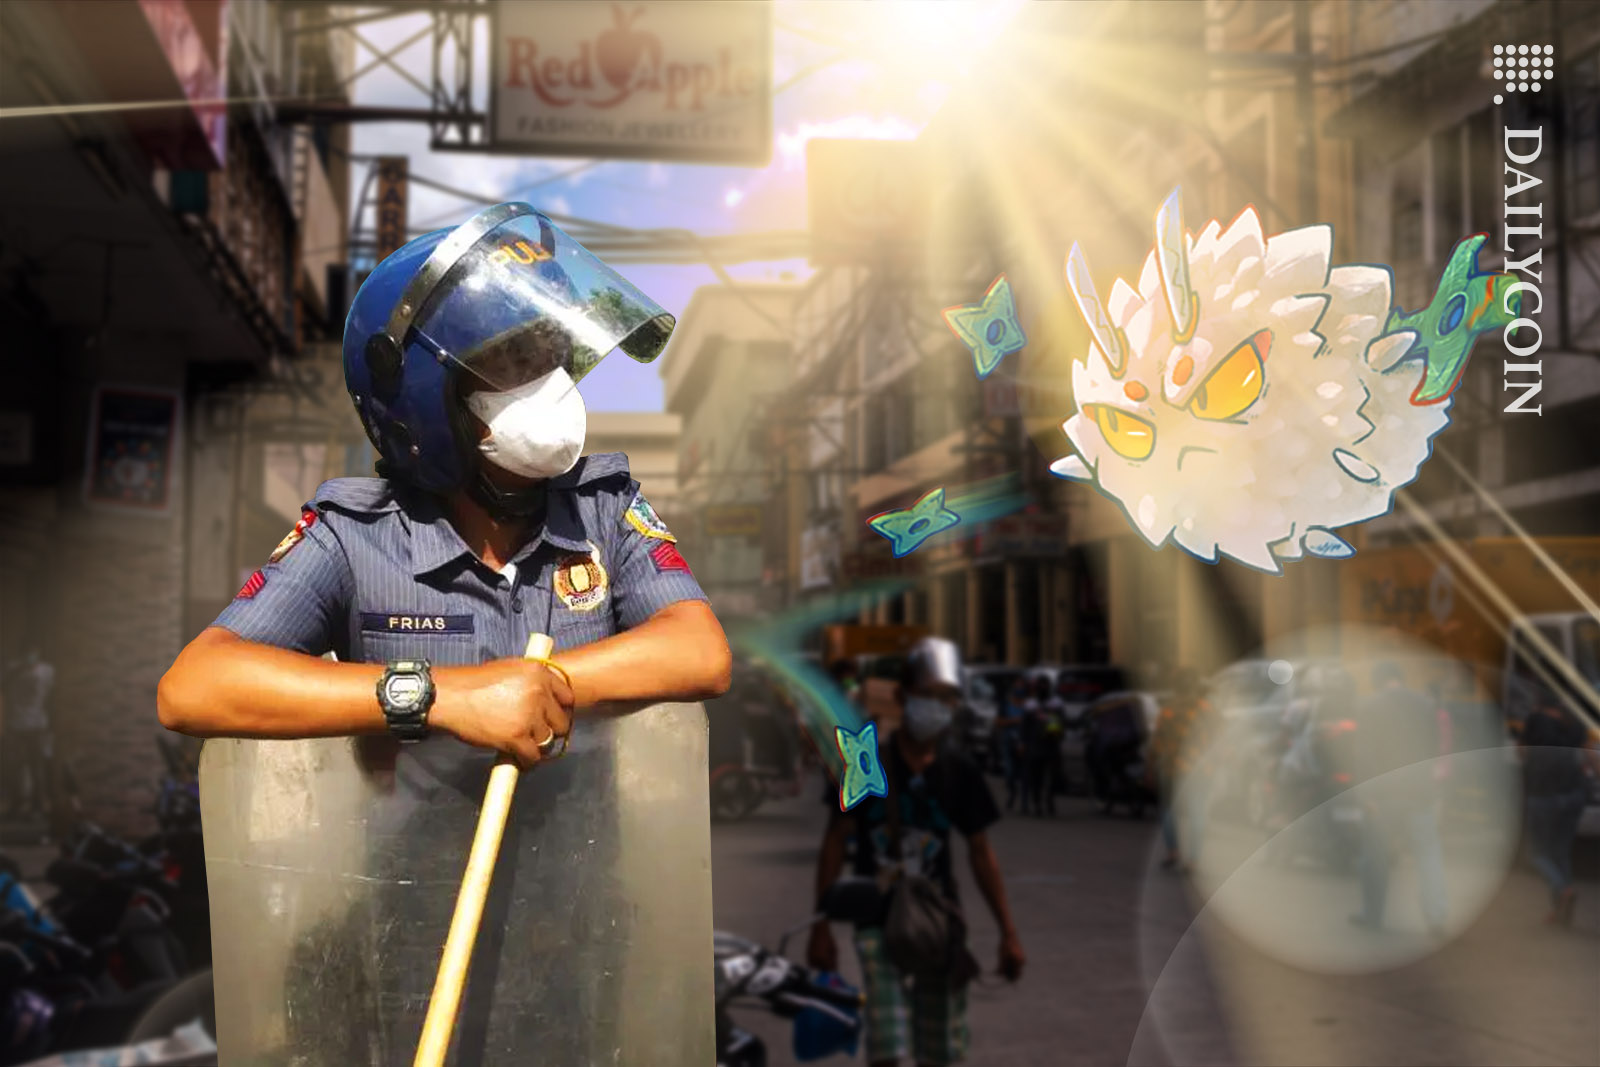 Philippino riot police officer dealing with an agressive Axie Infinity character.